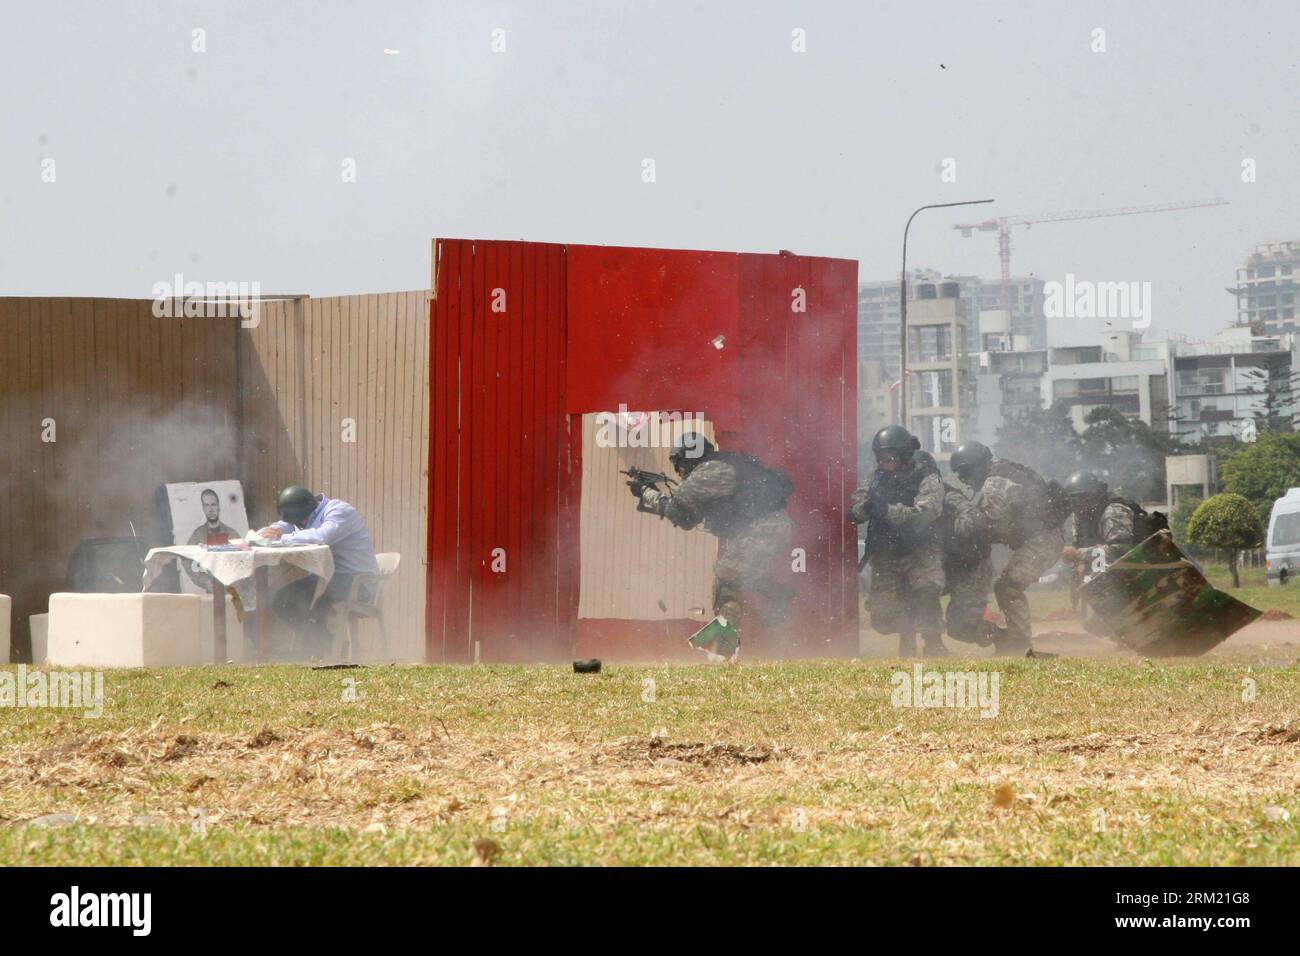 Bildnummer: 59666016 Datum: 19.05.2013 Copyright: imago/Xinhua (130520) --  SAN BORJA, May 19, 2013 (Xinhua) -- Soldiers participate in a hostage  rescue simulation during the 4th International Exhibition of Technology for  Defense and